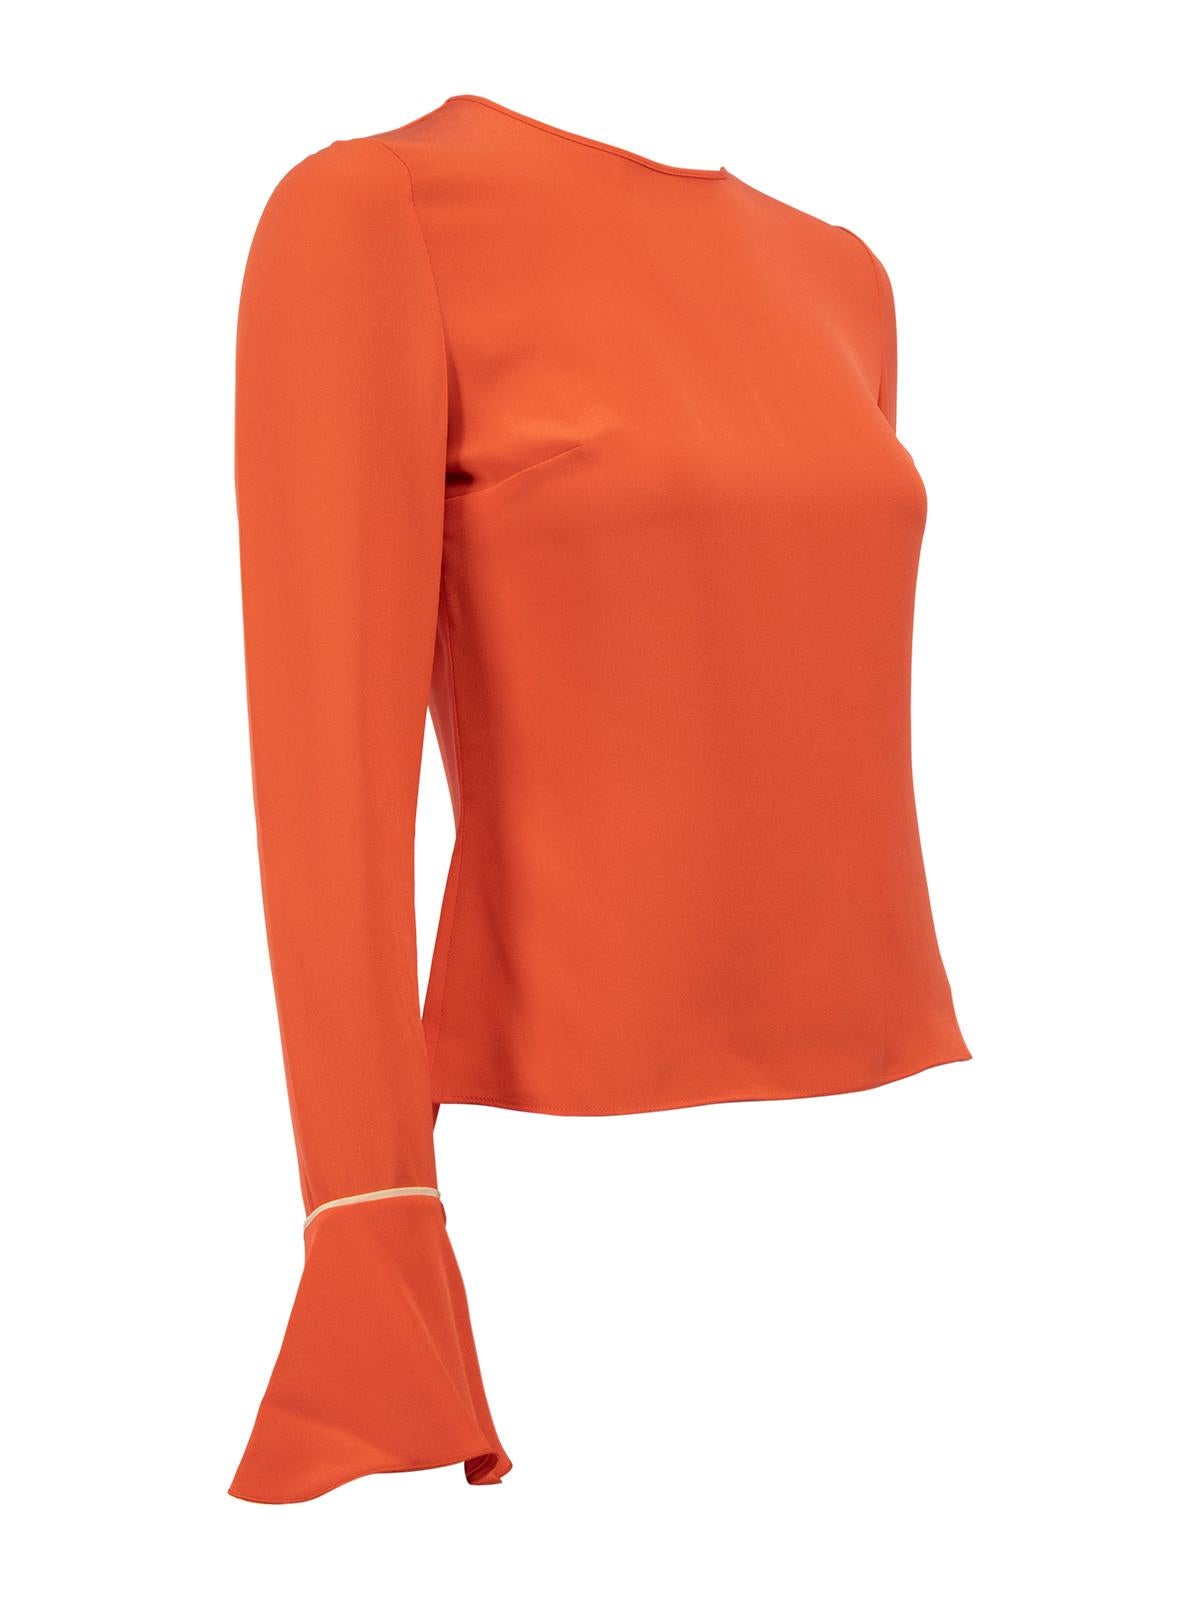 CONDITION is Never worn, with tags. No visible wear to top is evident on this used Roksanda designer resale item. Details Coral Silk Top Long bell sleeve Round neckline Ruffled cuffs Back zip fastening with hook and eye Made in Italy Composition